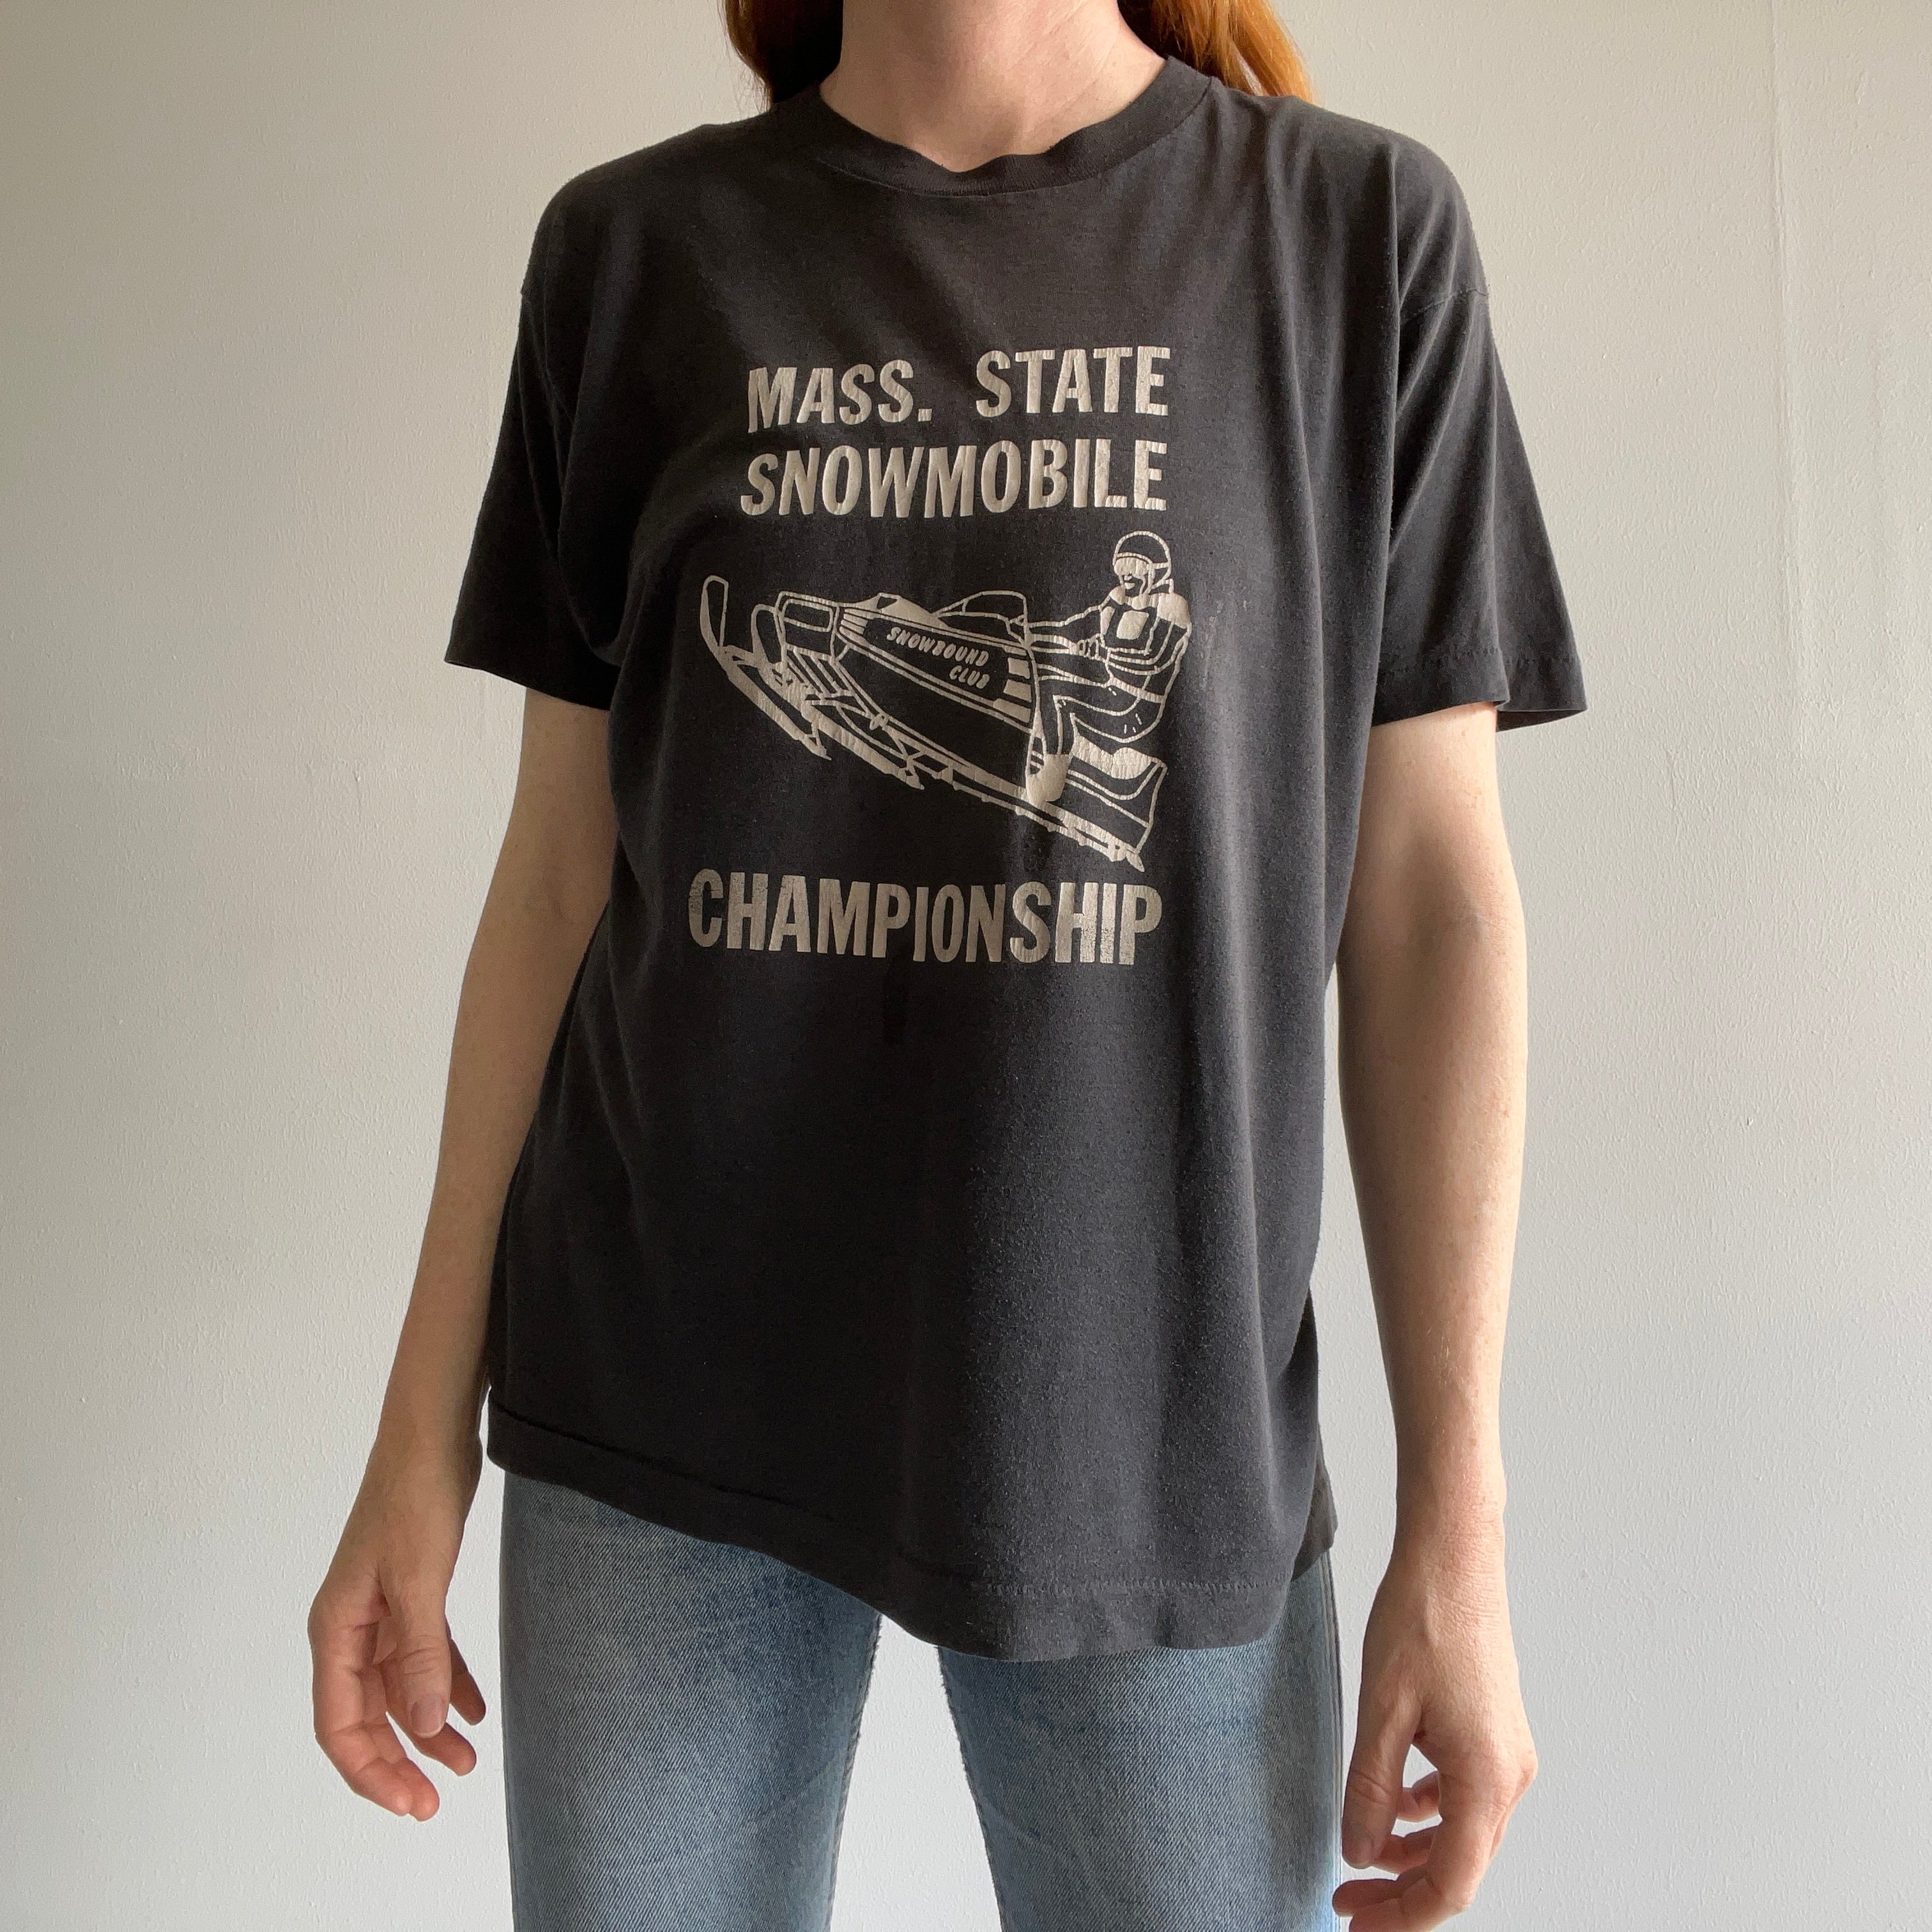 1980s (early) Snowmobile Championships T-Shirt